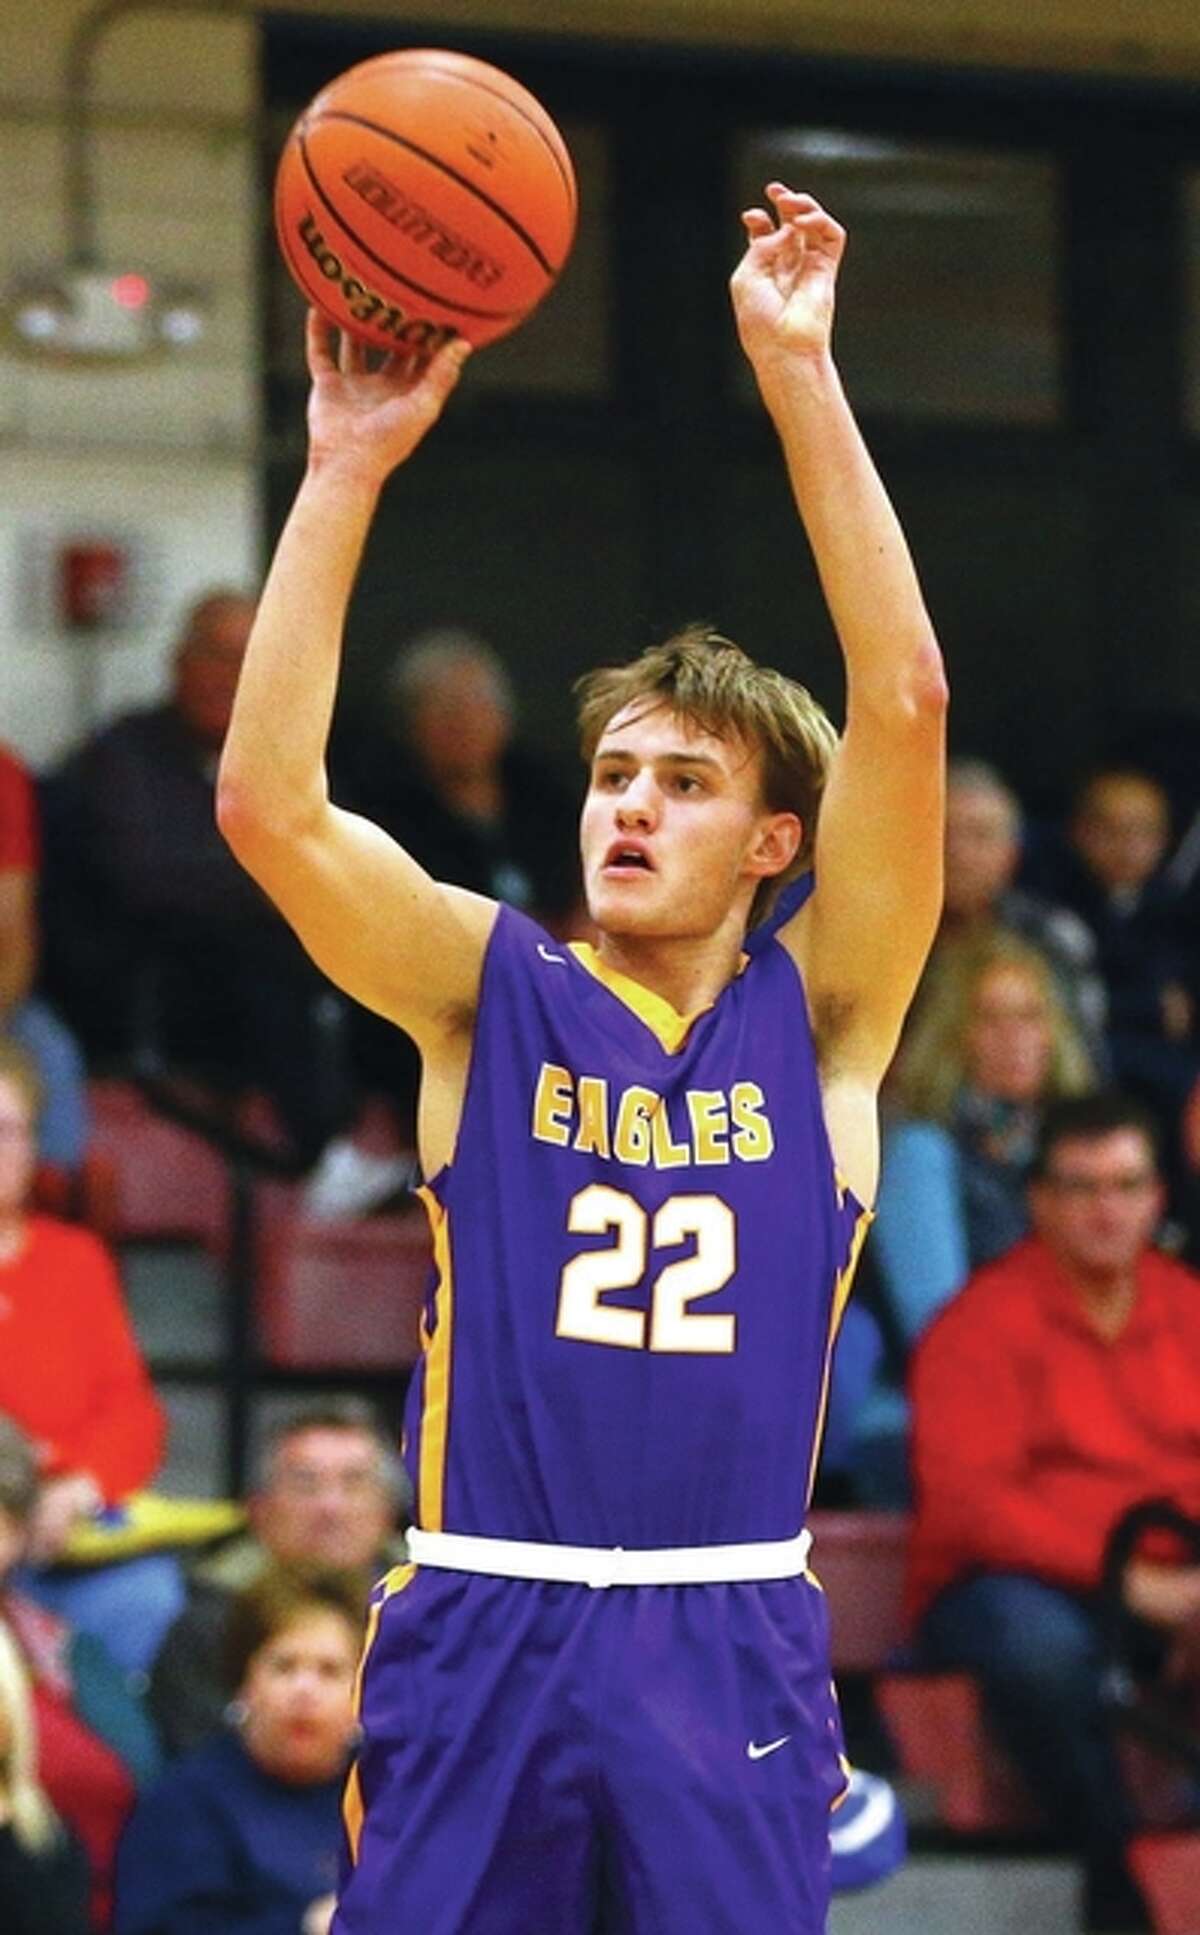 Civic Memorial senior Adam Hill led the Eagles to a victory Saturday at the Columbia Tourney. "He was our best player tonight," CM coach Doug Carey said.